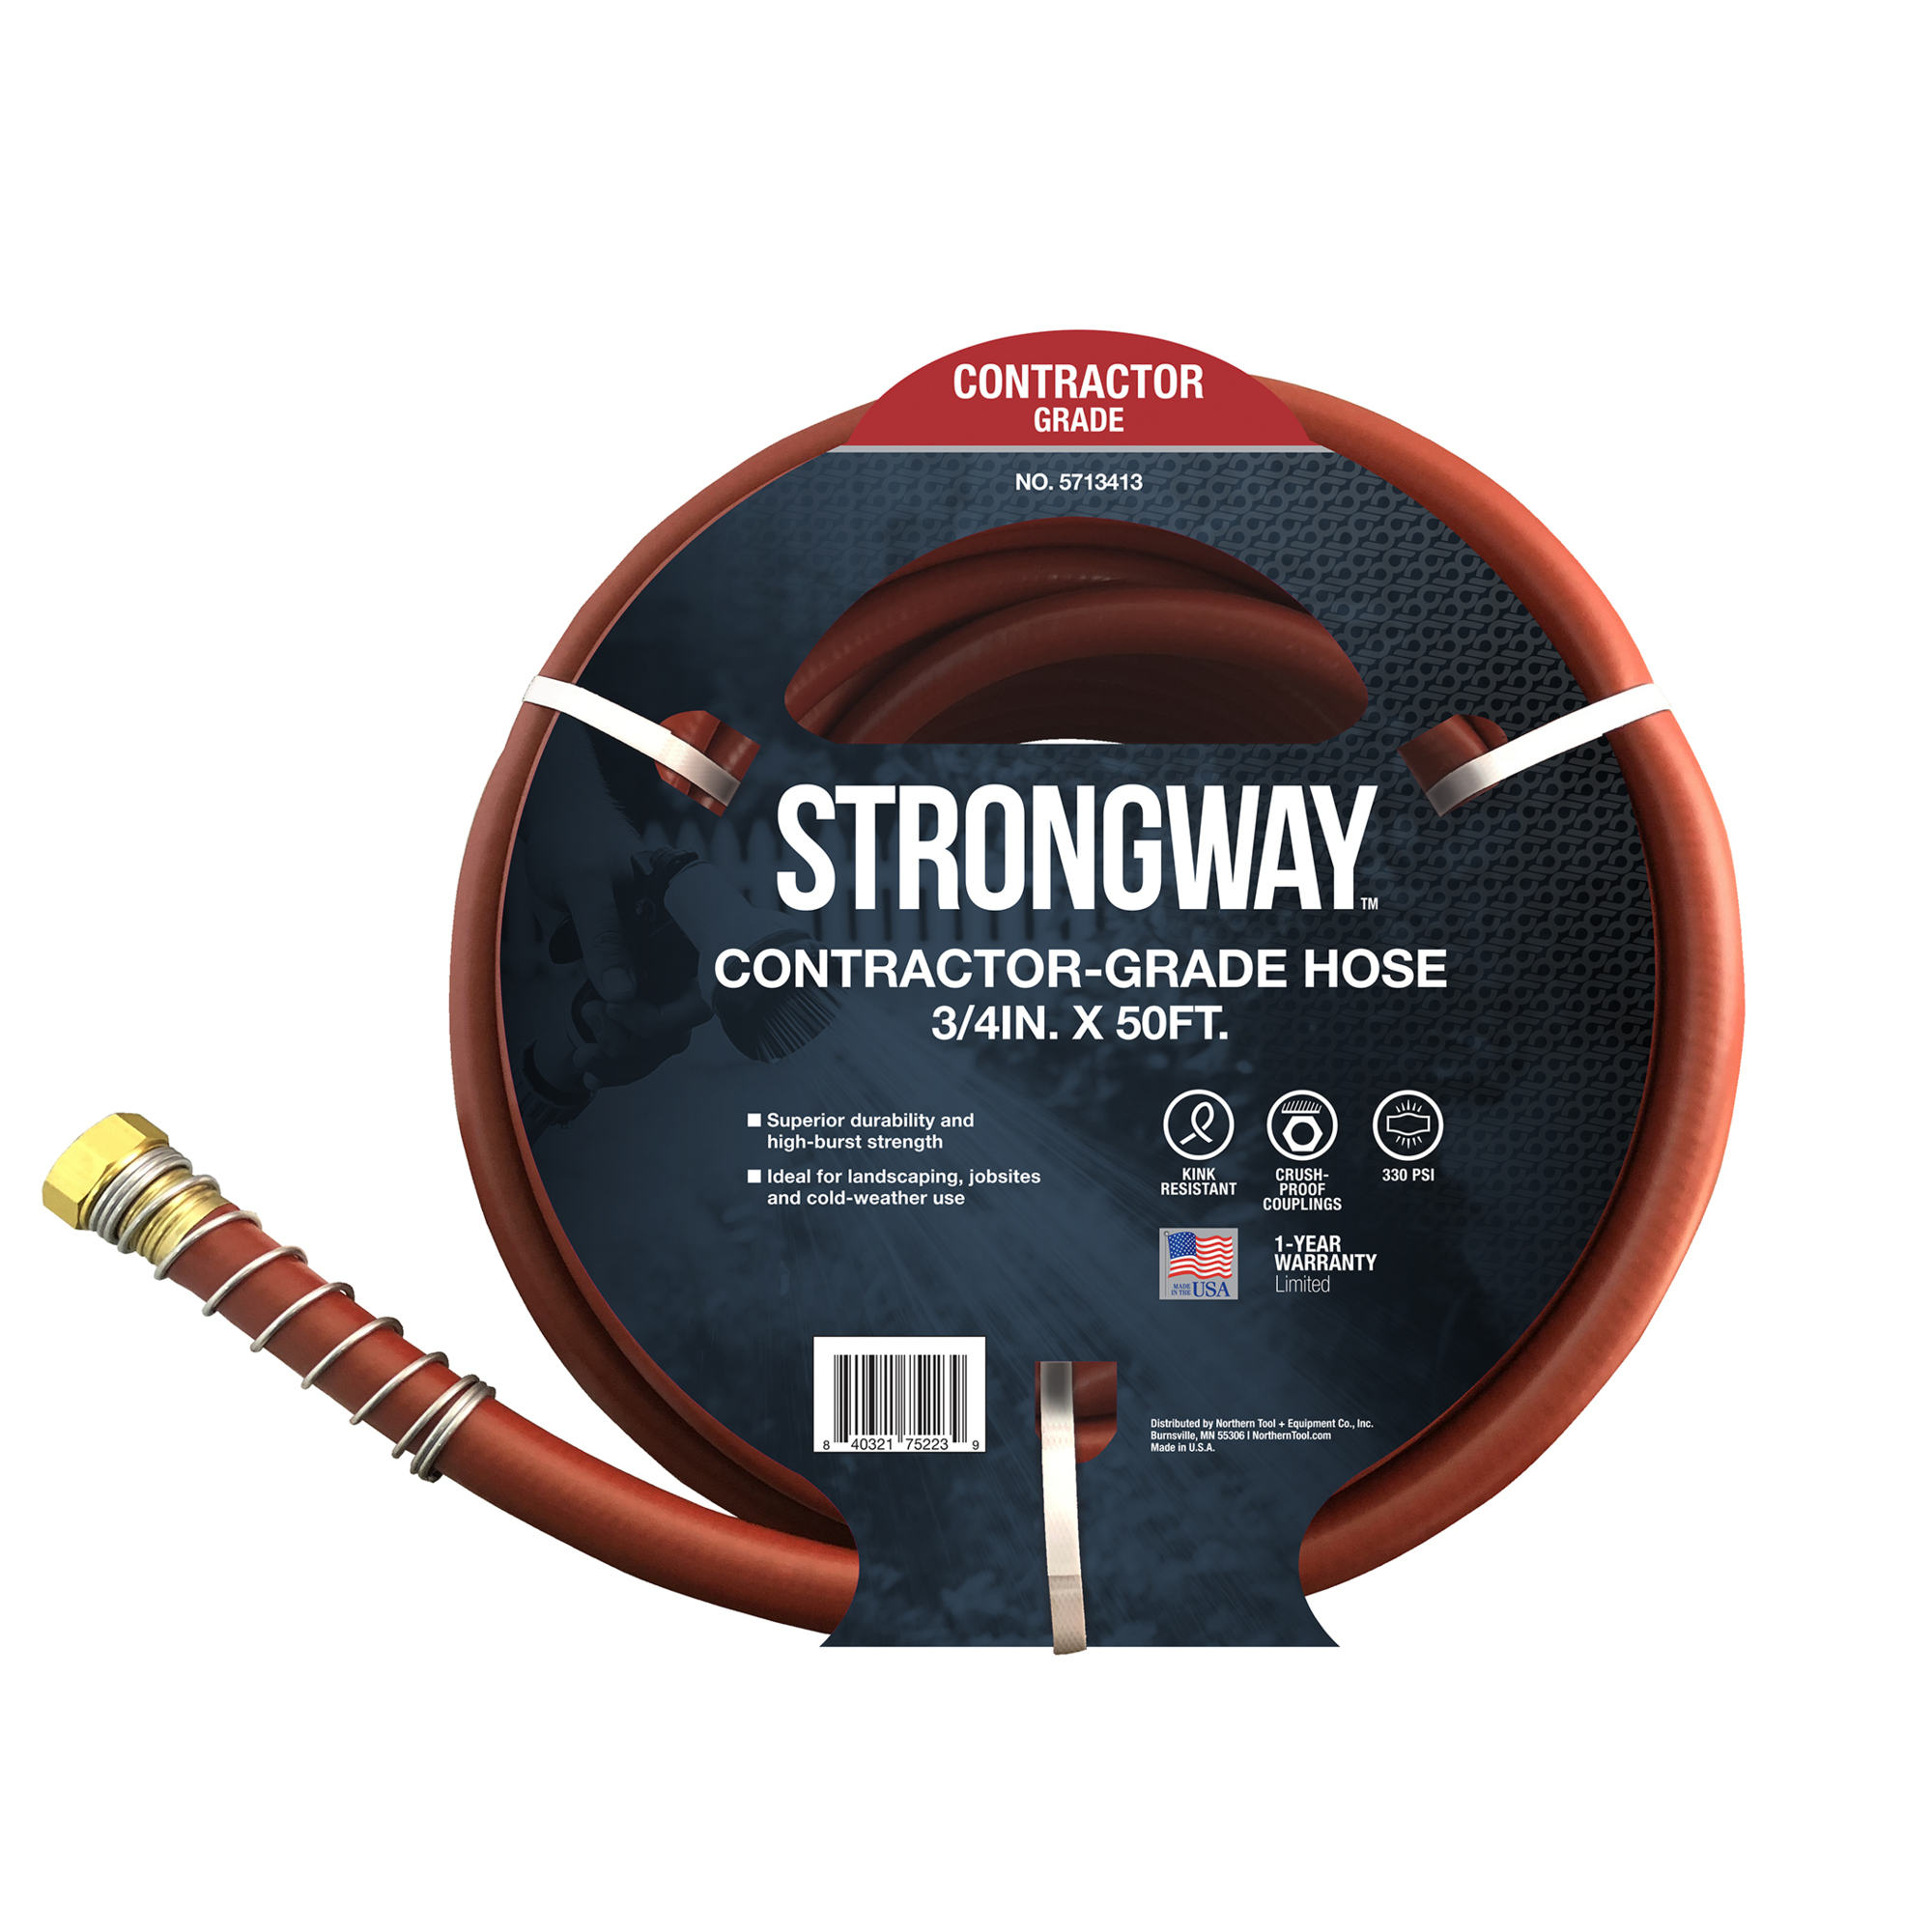 Strongway Contractor-Grade Water Hose, 3/4Inch x 50ft., 300 PSI, PVC, w/ Brass Couplings